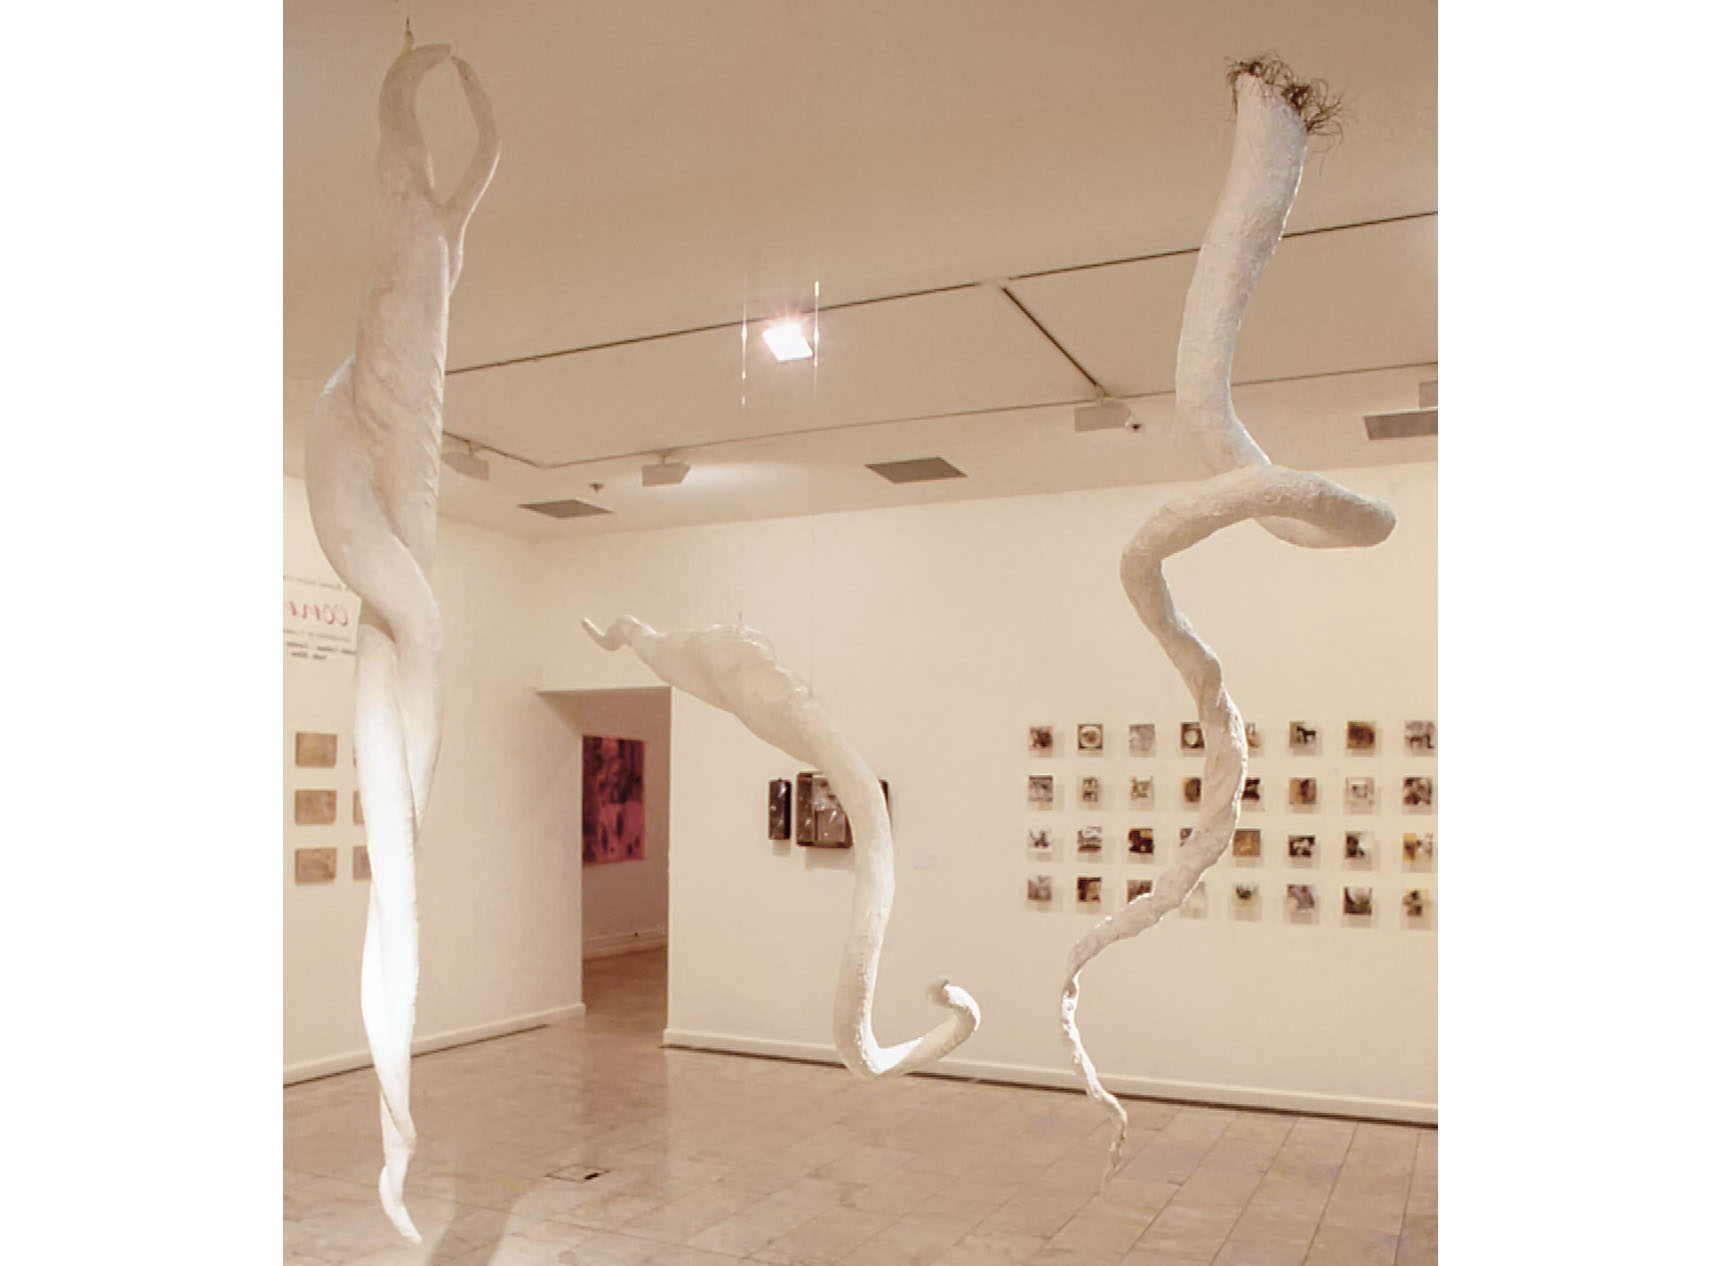 Exhibition: Connect - sculptures called Rapture, Embraced Captive, Untamed, Gala